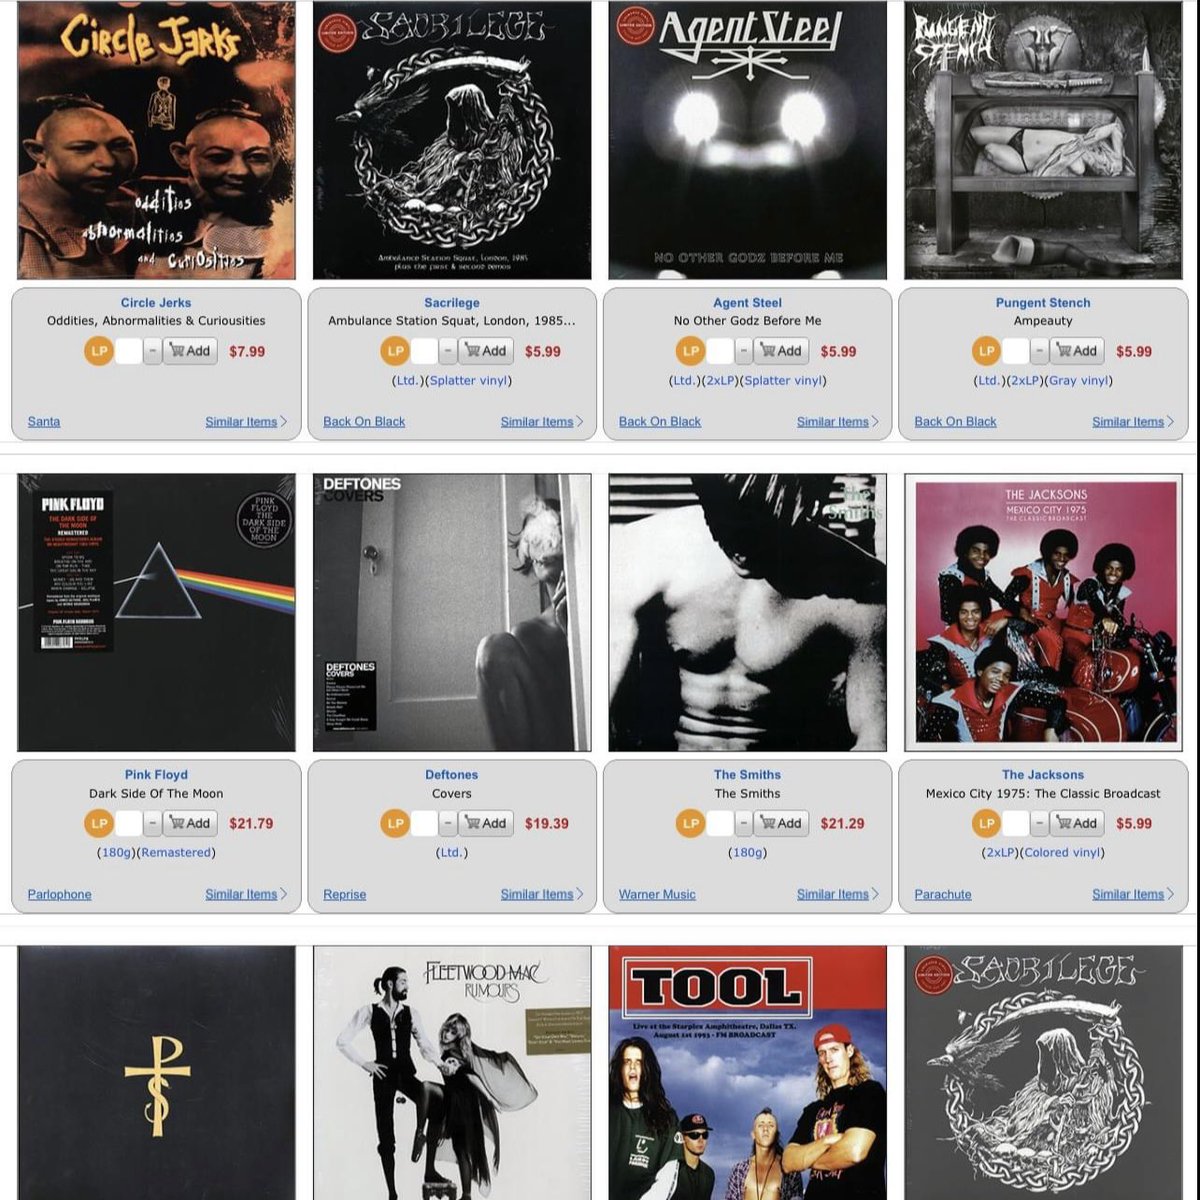 TOP SELLERS - have a look on the website, see the next 50+ titles, add to your shopping cart & have an awesome weekend.🎸
#LP #vinylrecords #supportsmall #rocknroll #heavymetal #classicrock #taylorswift #thesmiths #gorillaz #thecramps #pinkfloyd